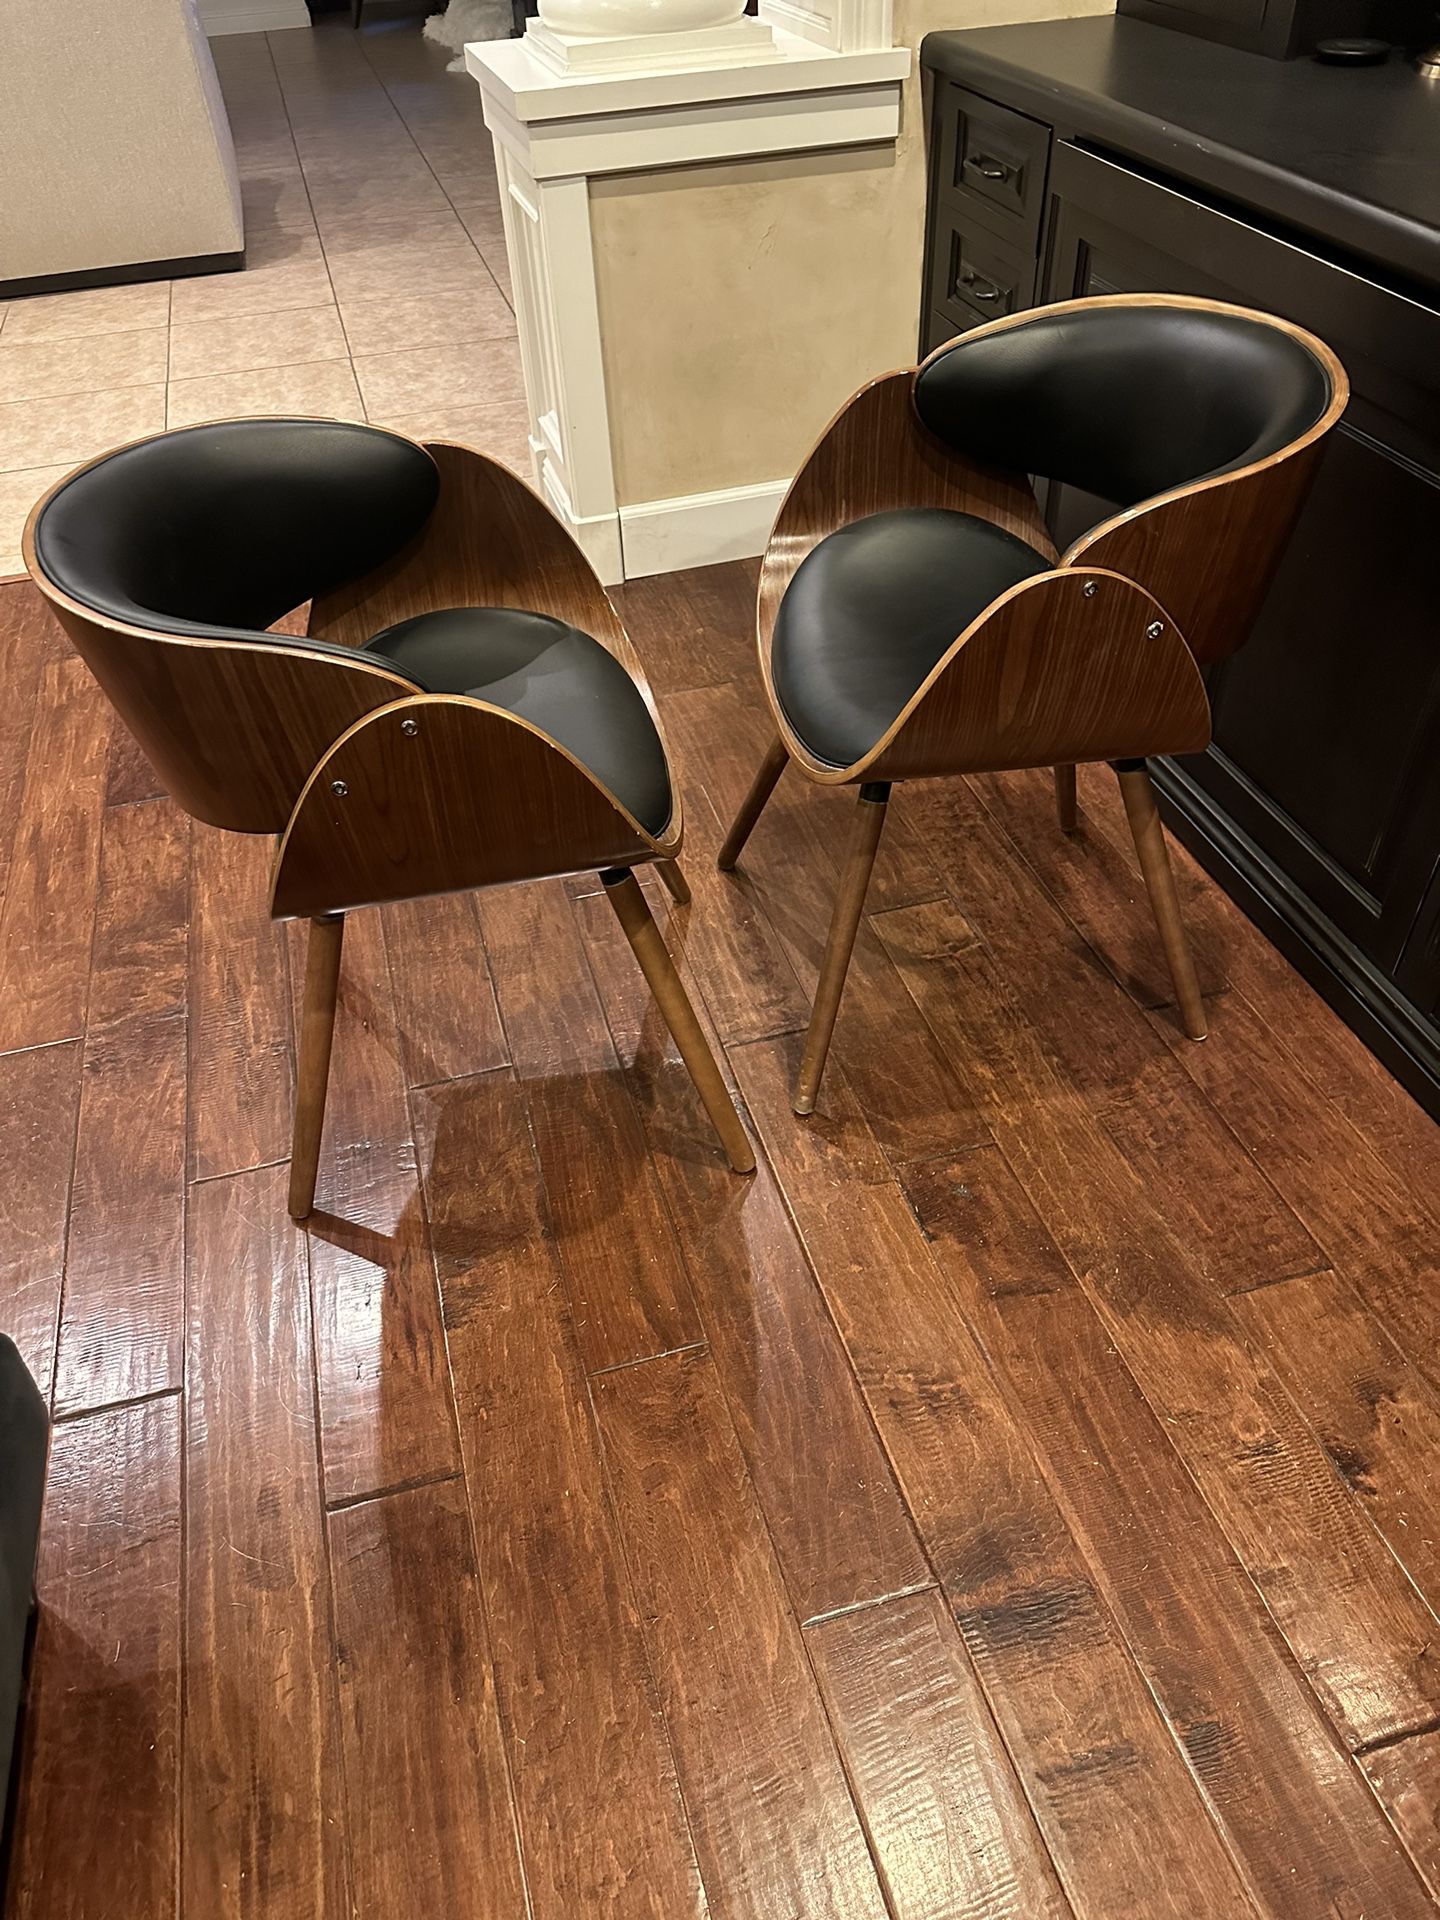 Three Mid Century Style Chairs $50 Each